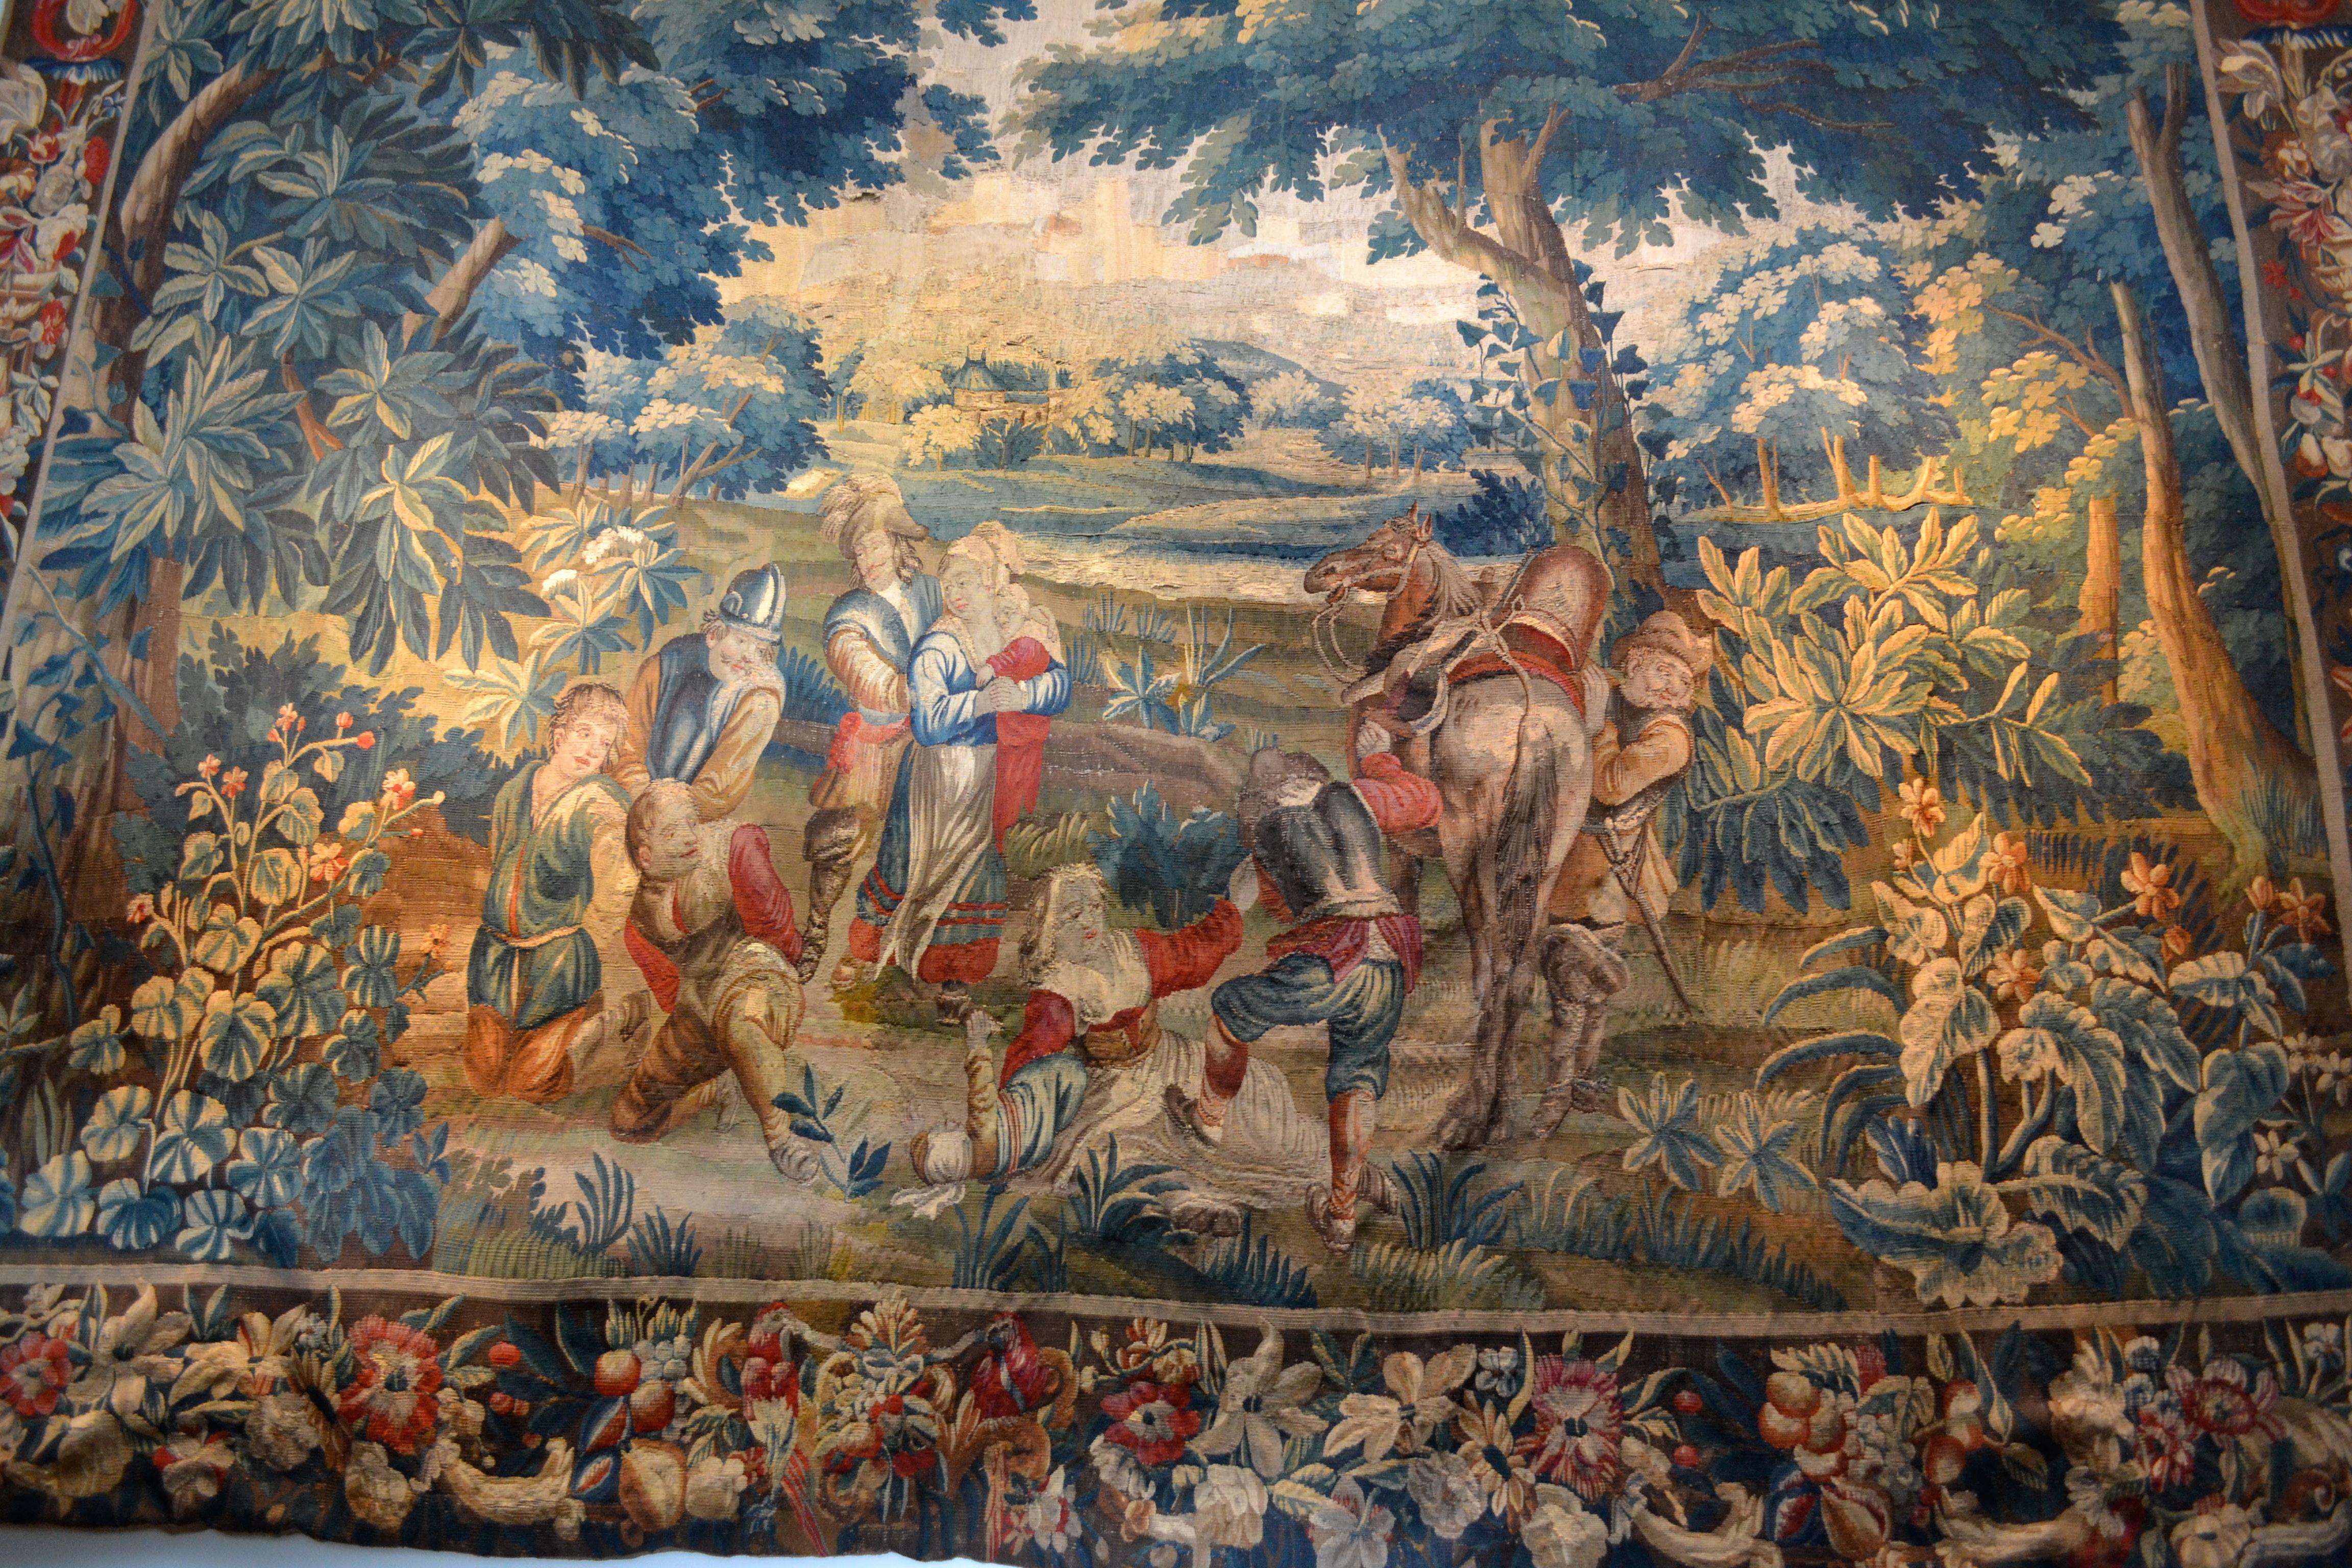 Hand-Woven 17th Century Flemish Tapestry from the Estate of Baron Munchausen